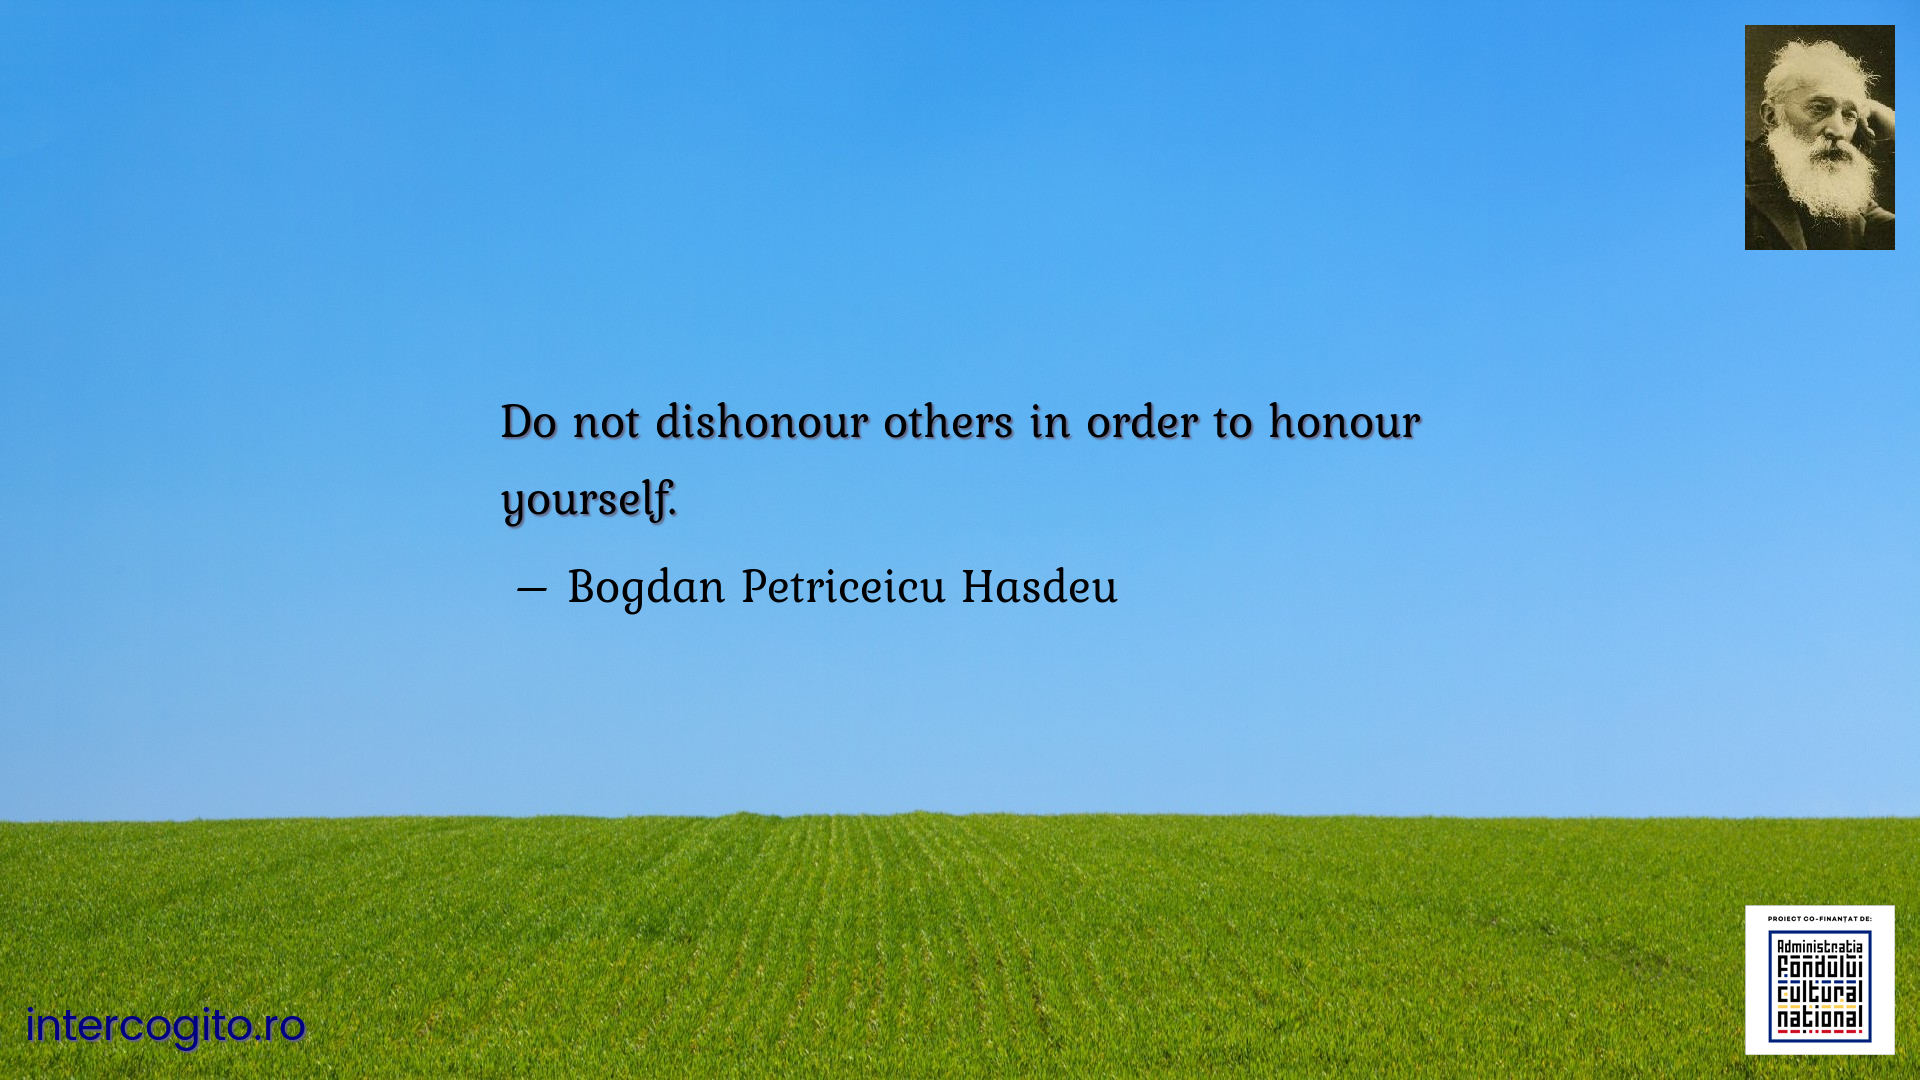 Do not dishonour others in order to honour yourself.